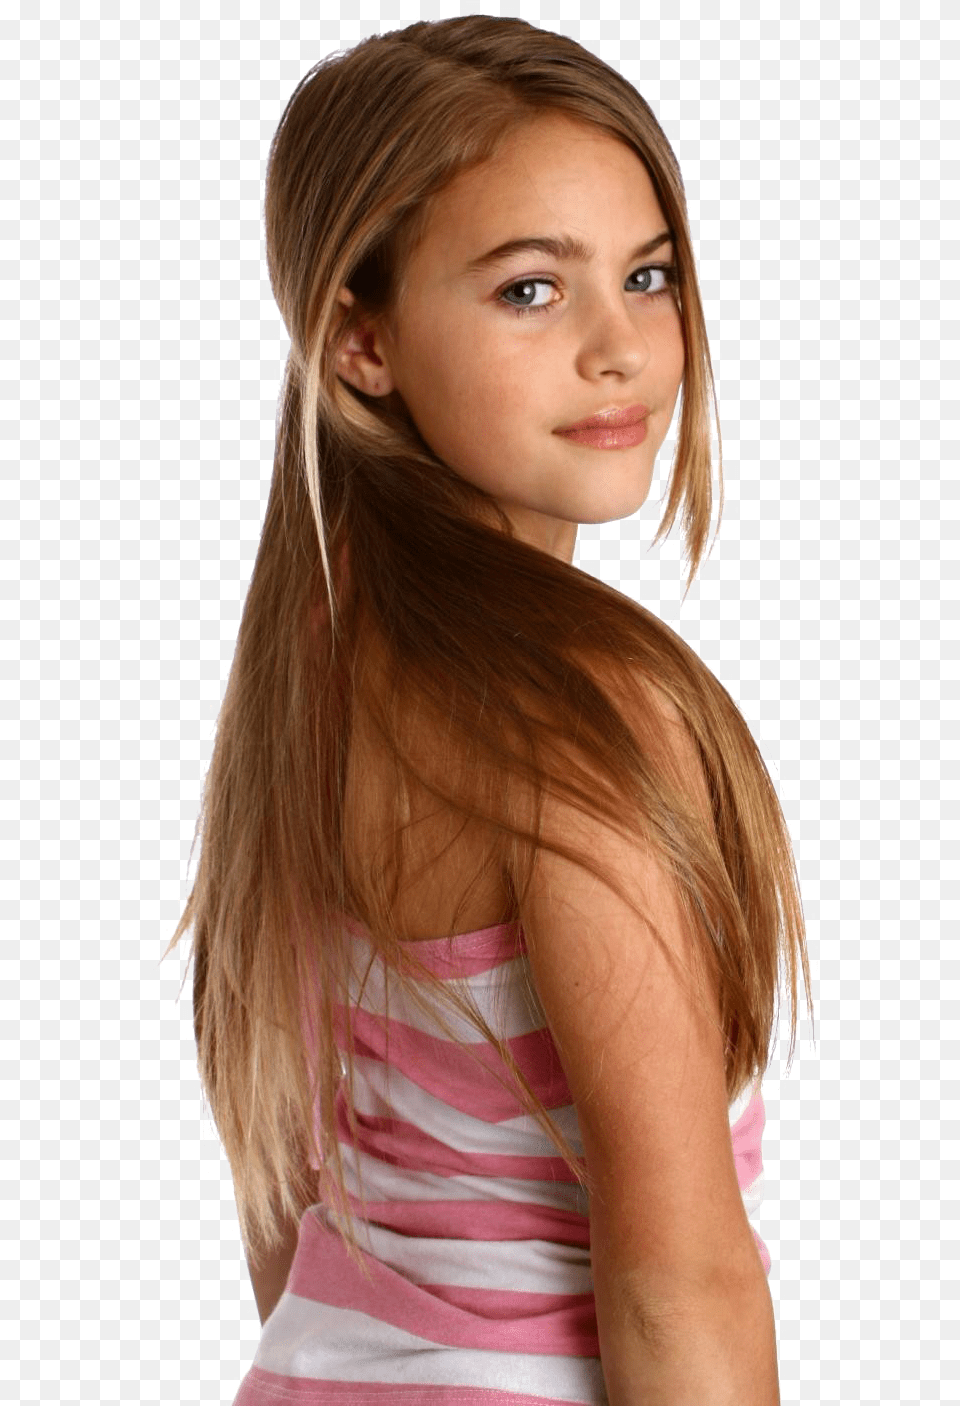 Girls Free Download Young Girl, Child, Female, Person, Portrait Png Image